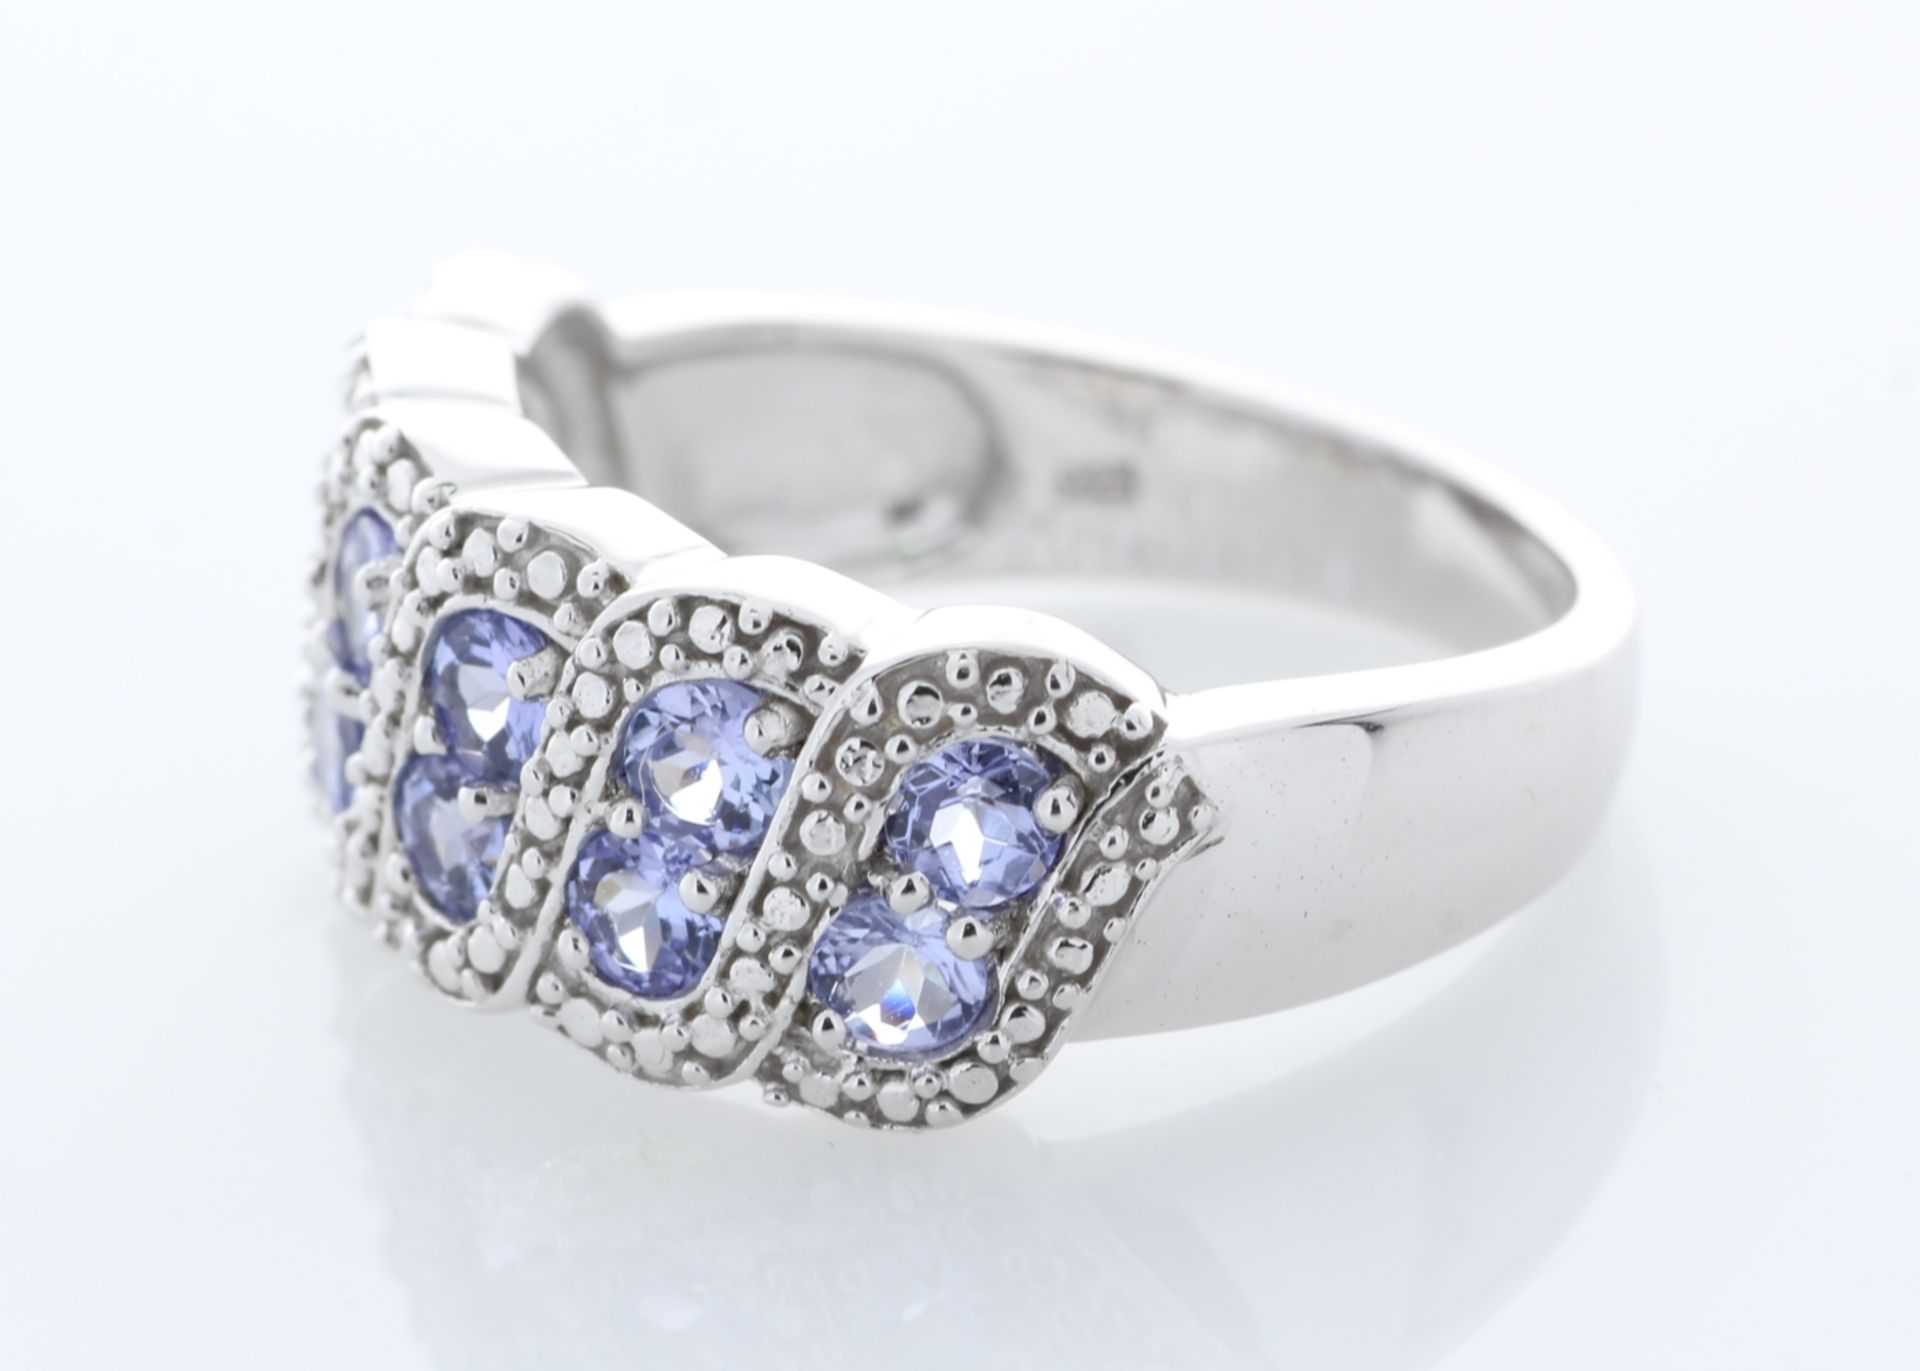 Sterling Silver Tanzanite Ring - Valued By AGI £295.00 - Sterling silver tanzanite ring, set with - Image 2 of 4